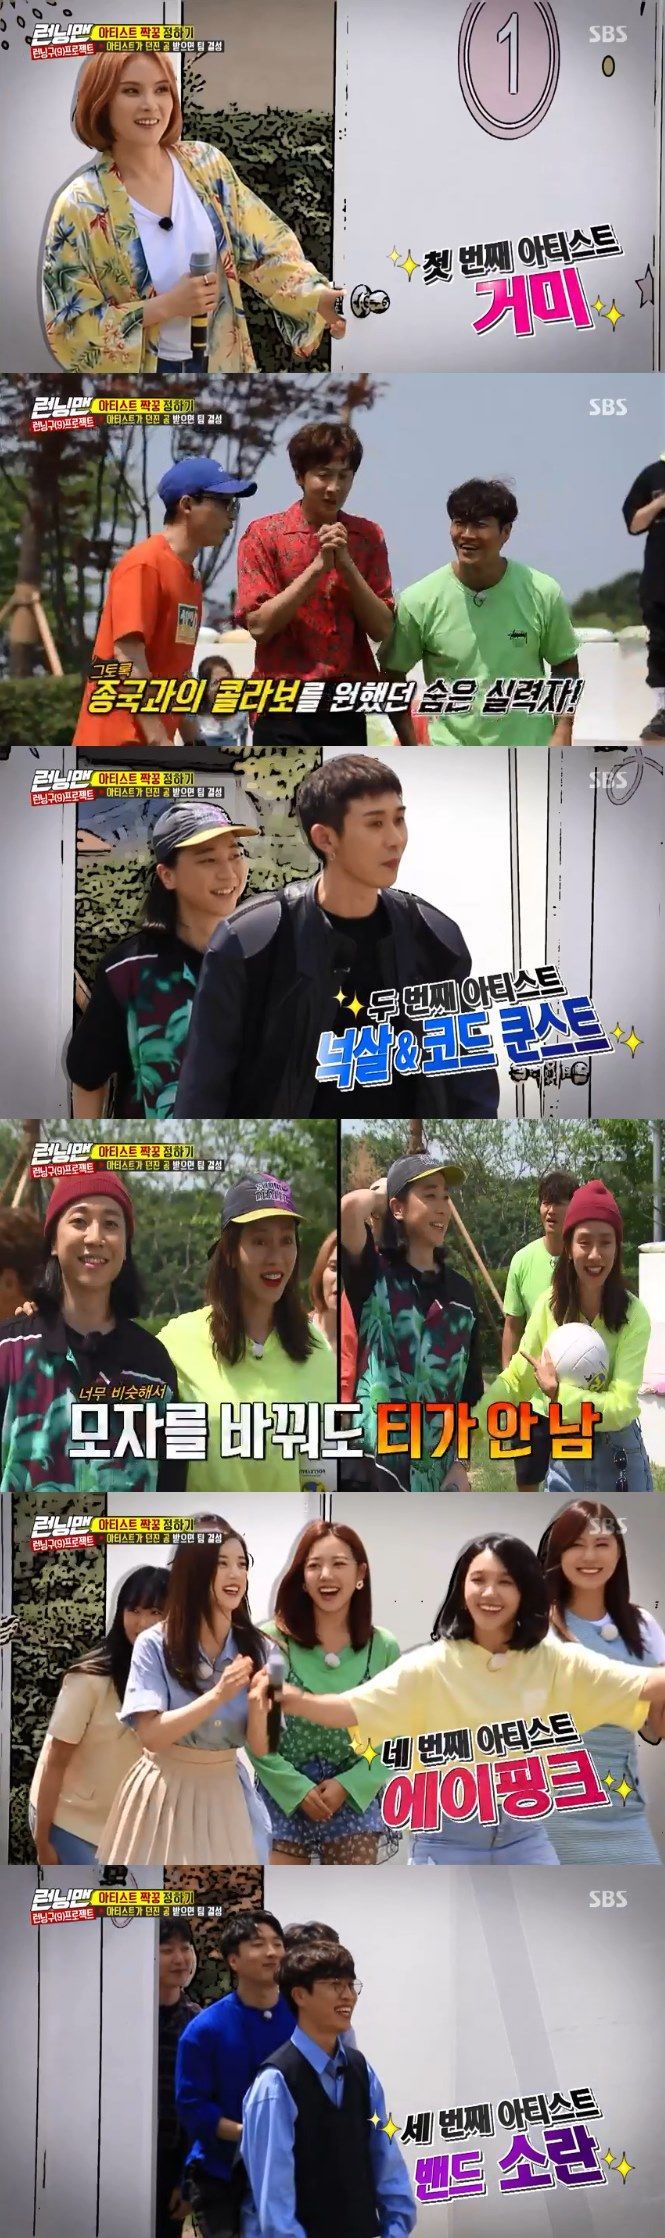 On SBS Running Man broadcasted on the 7th, Lee Su-hyun, who will perform with the members ahead of the 9th anniversary fan meeting, appeared.Before Lee Su-hyun revealed his identity, the members had time to listen to the hint and to Murder, She Wrote.With Murder, She Wrote unfolding from 20s to teachers, the crew teamed up with two members and one artist.The Artist with a pretty voice has Yoo Jae-seok, Lee Kwang-soo, Kim Jong-kook, Ji Suk-jin, and Yang Se-hyung.The Artist No.1, who teamed up with Lee Kwang-soo and Kim Jong-kook who caught the ball, was a singer spider.Kim Jong-kook expected that he had never had a duet with a singer since his debut.From the second compartment, Nuchsal and Kodkunst teamed up with Song Ji-hyo and Haha; Song Ji-hyo was satisfied with the appearance of the resemblance, I really wanted to meet you.The band disturbance, which appeared as The Artist No. 3, met with Somin and Jae Seok; Ji Suk-jin and Yang Se-chan will be joined by The Artist Apink No. 4.